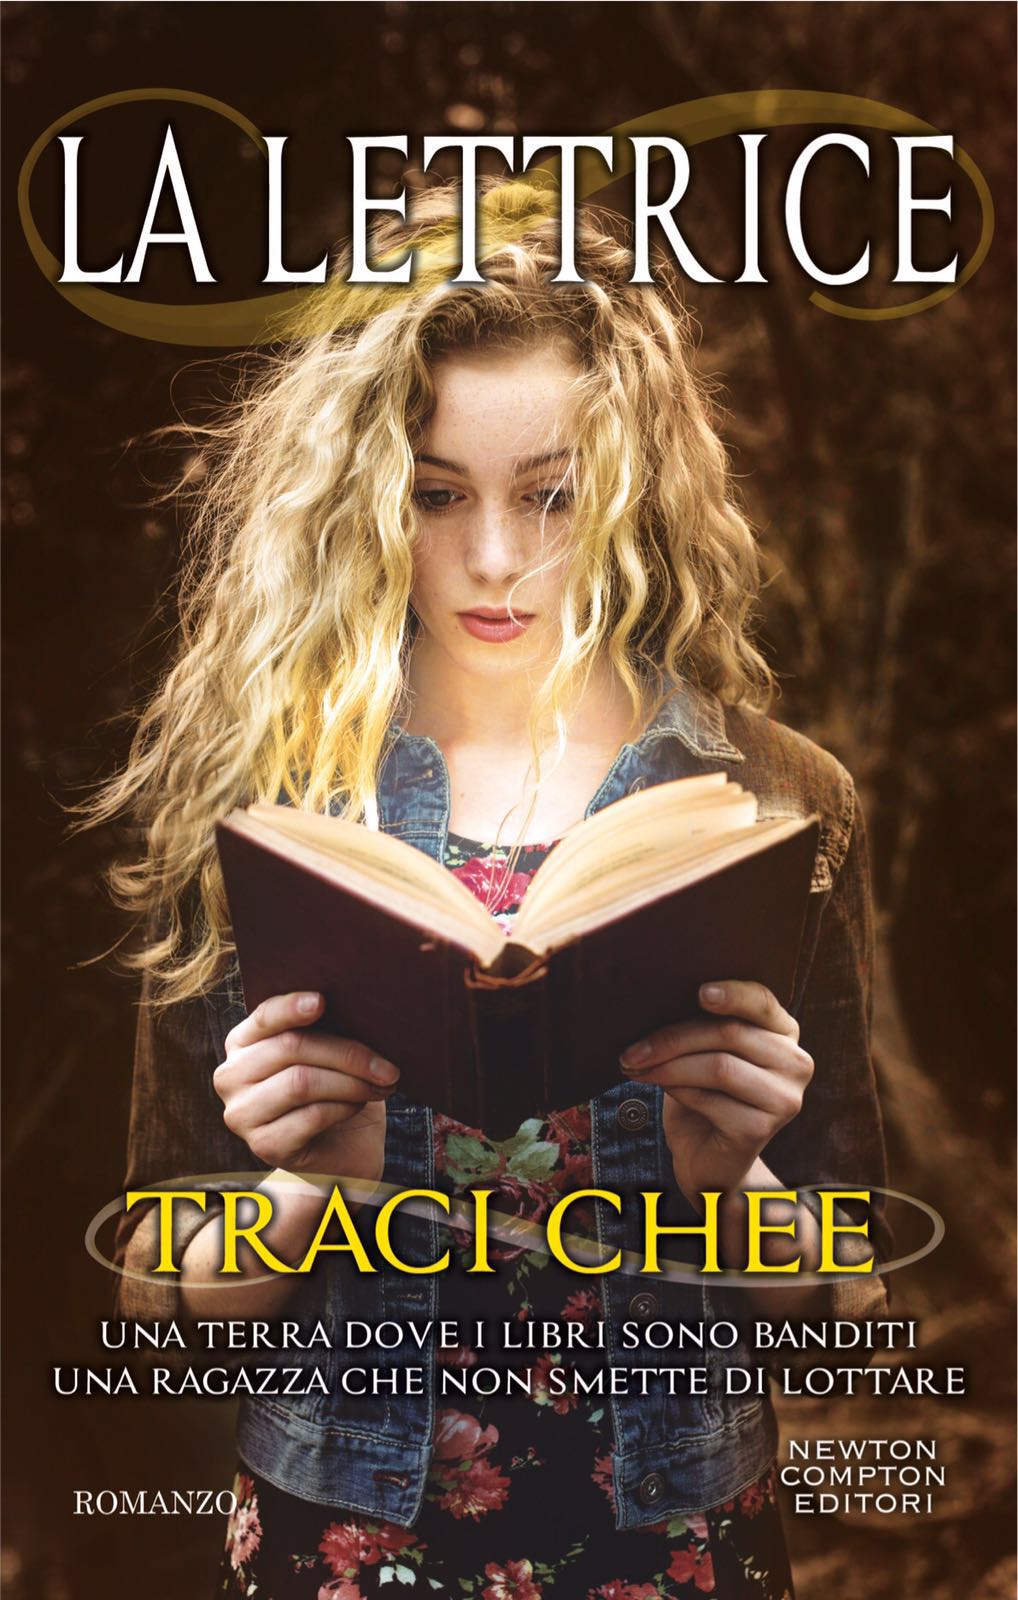 cover for the Italian edition of THE READER by Traci Chee, LA LETTRICE